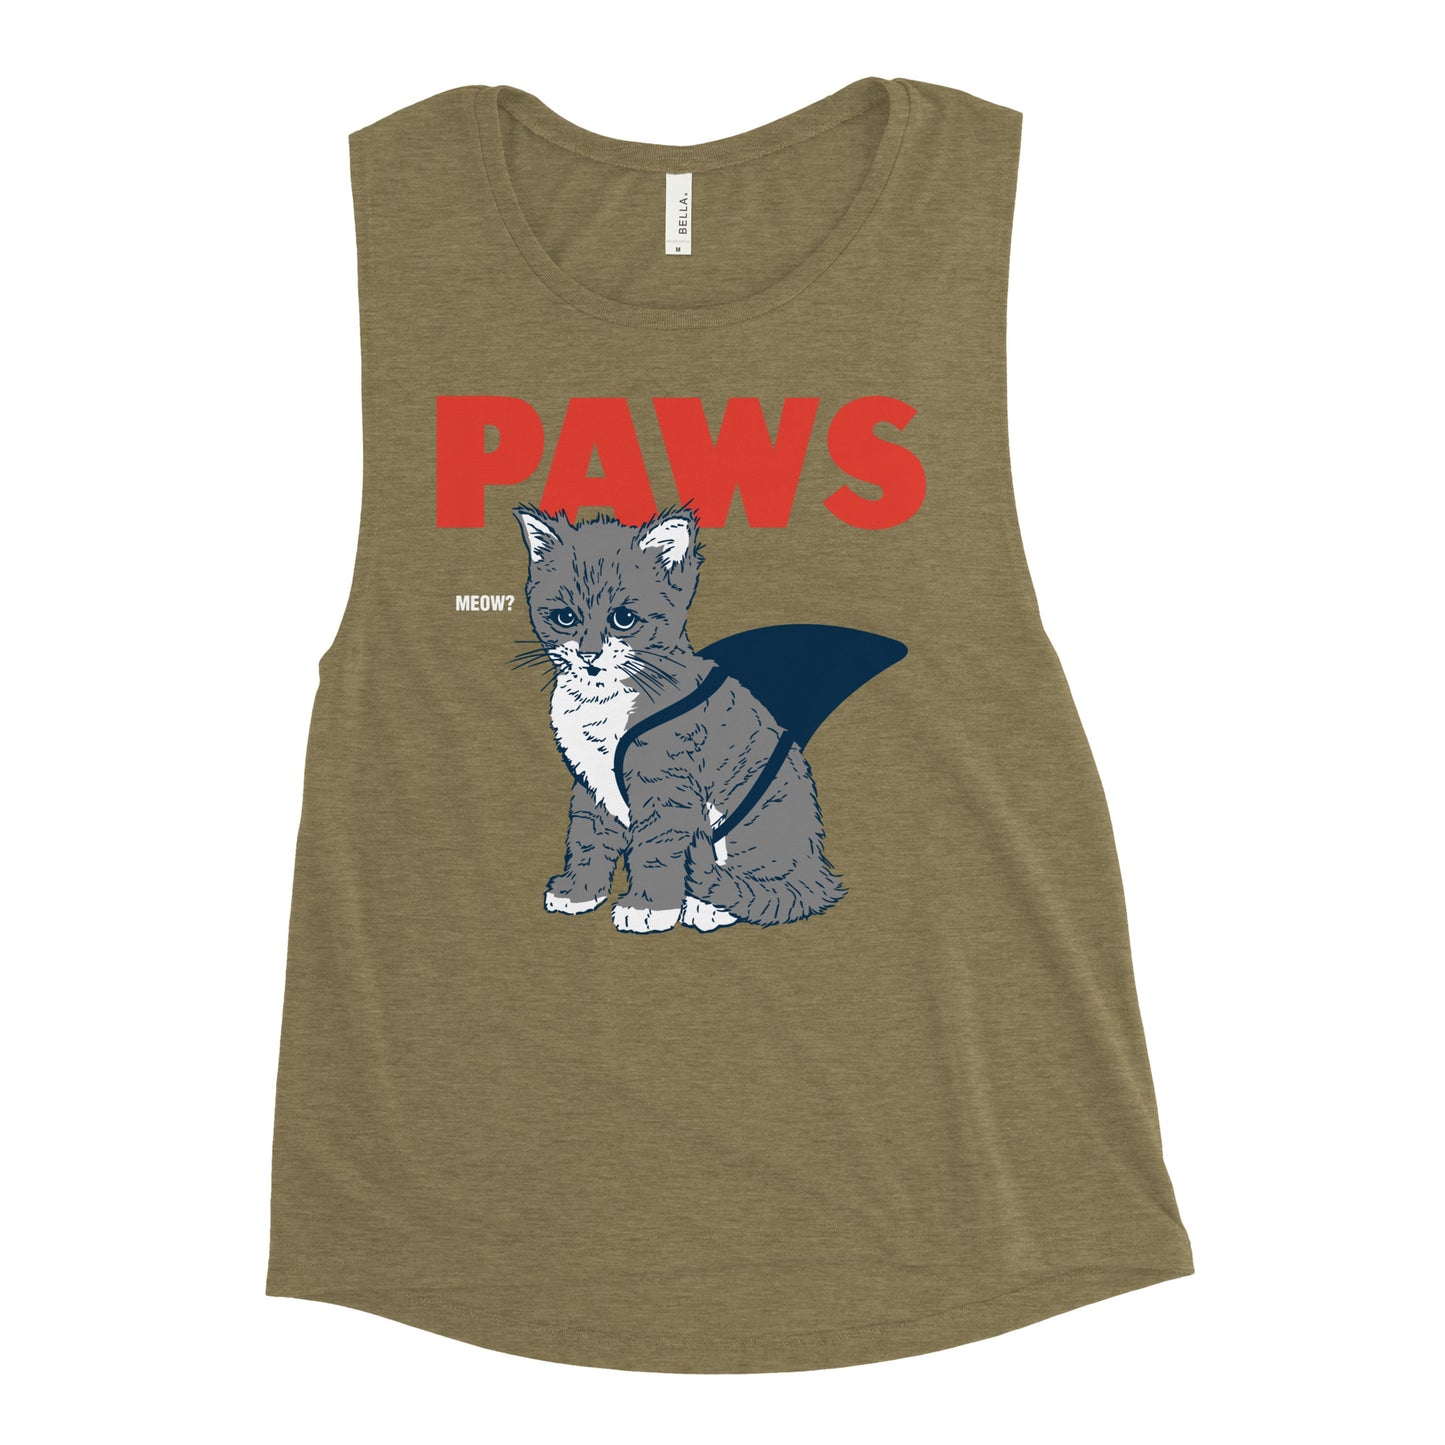 Paws Women's Muscle Tank